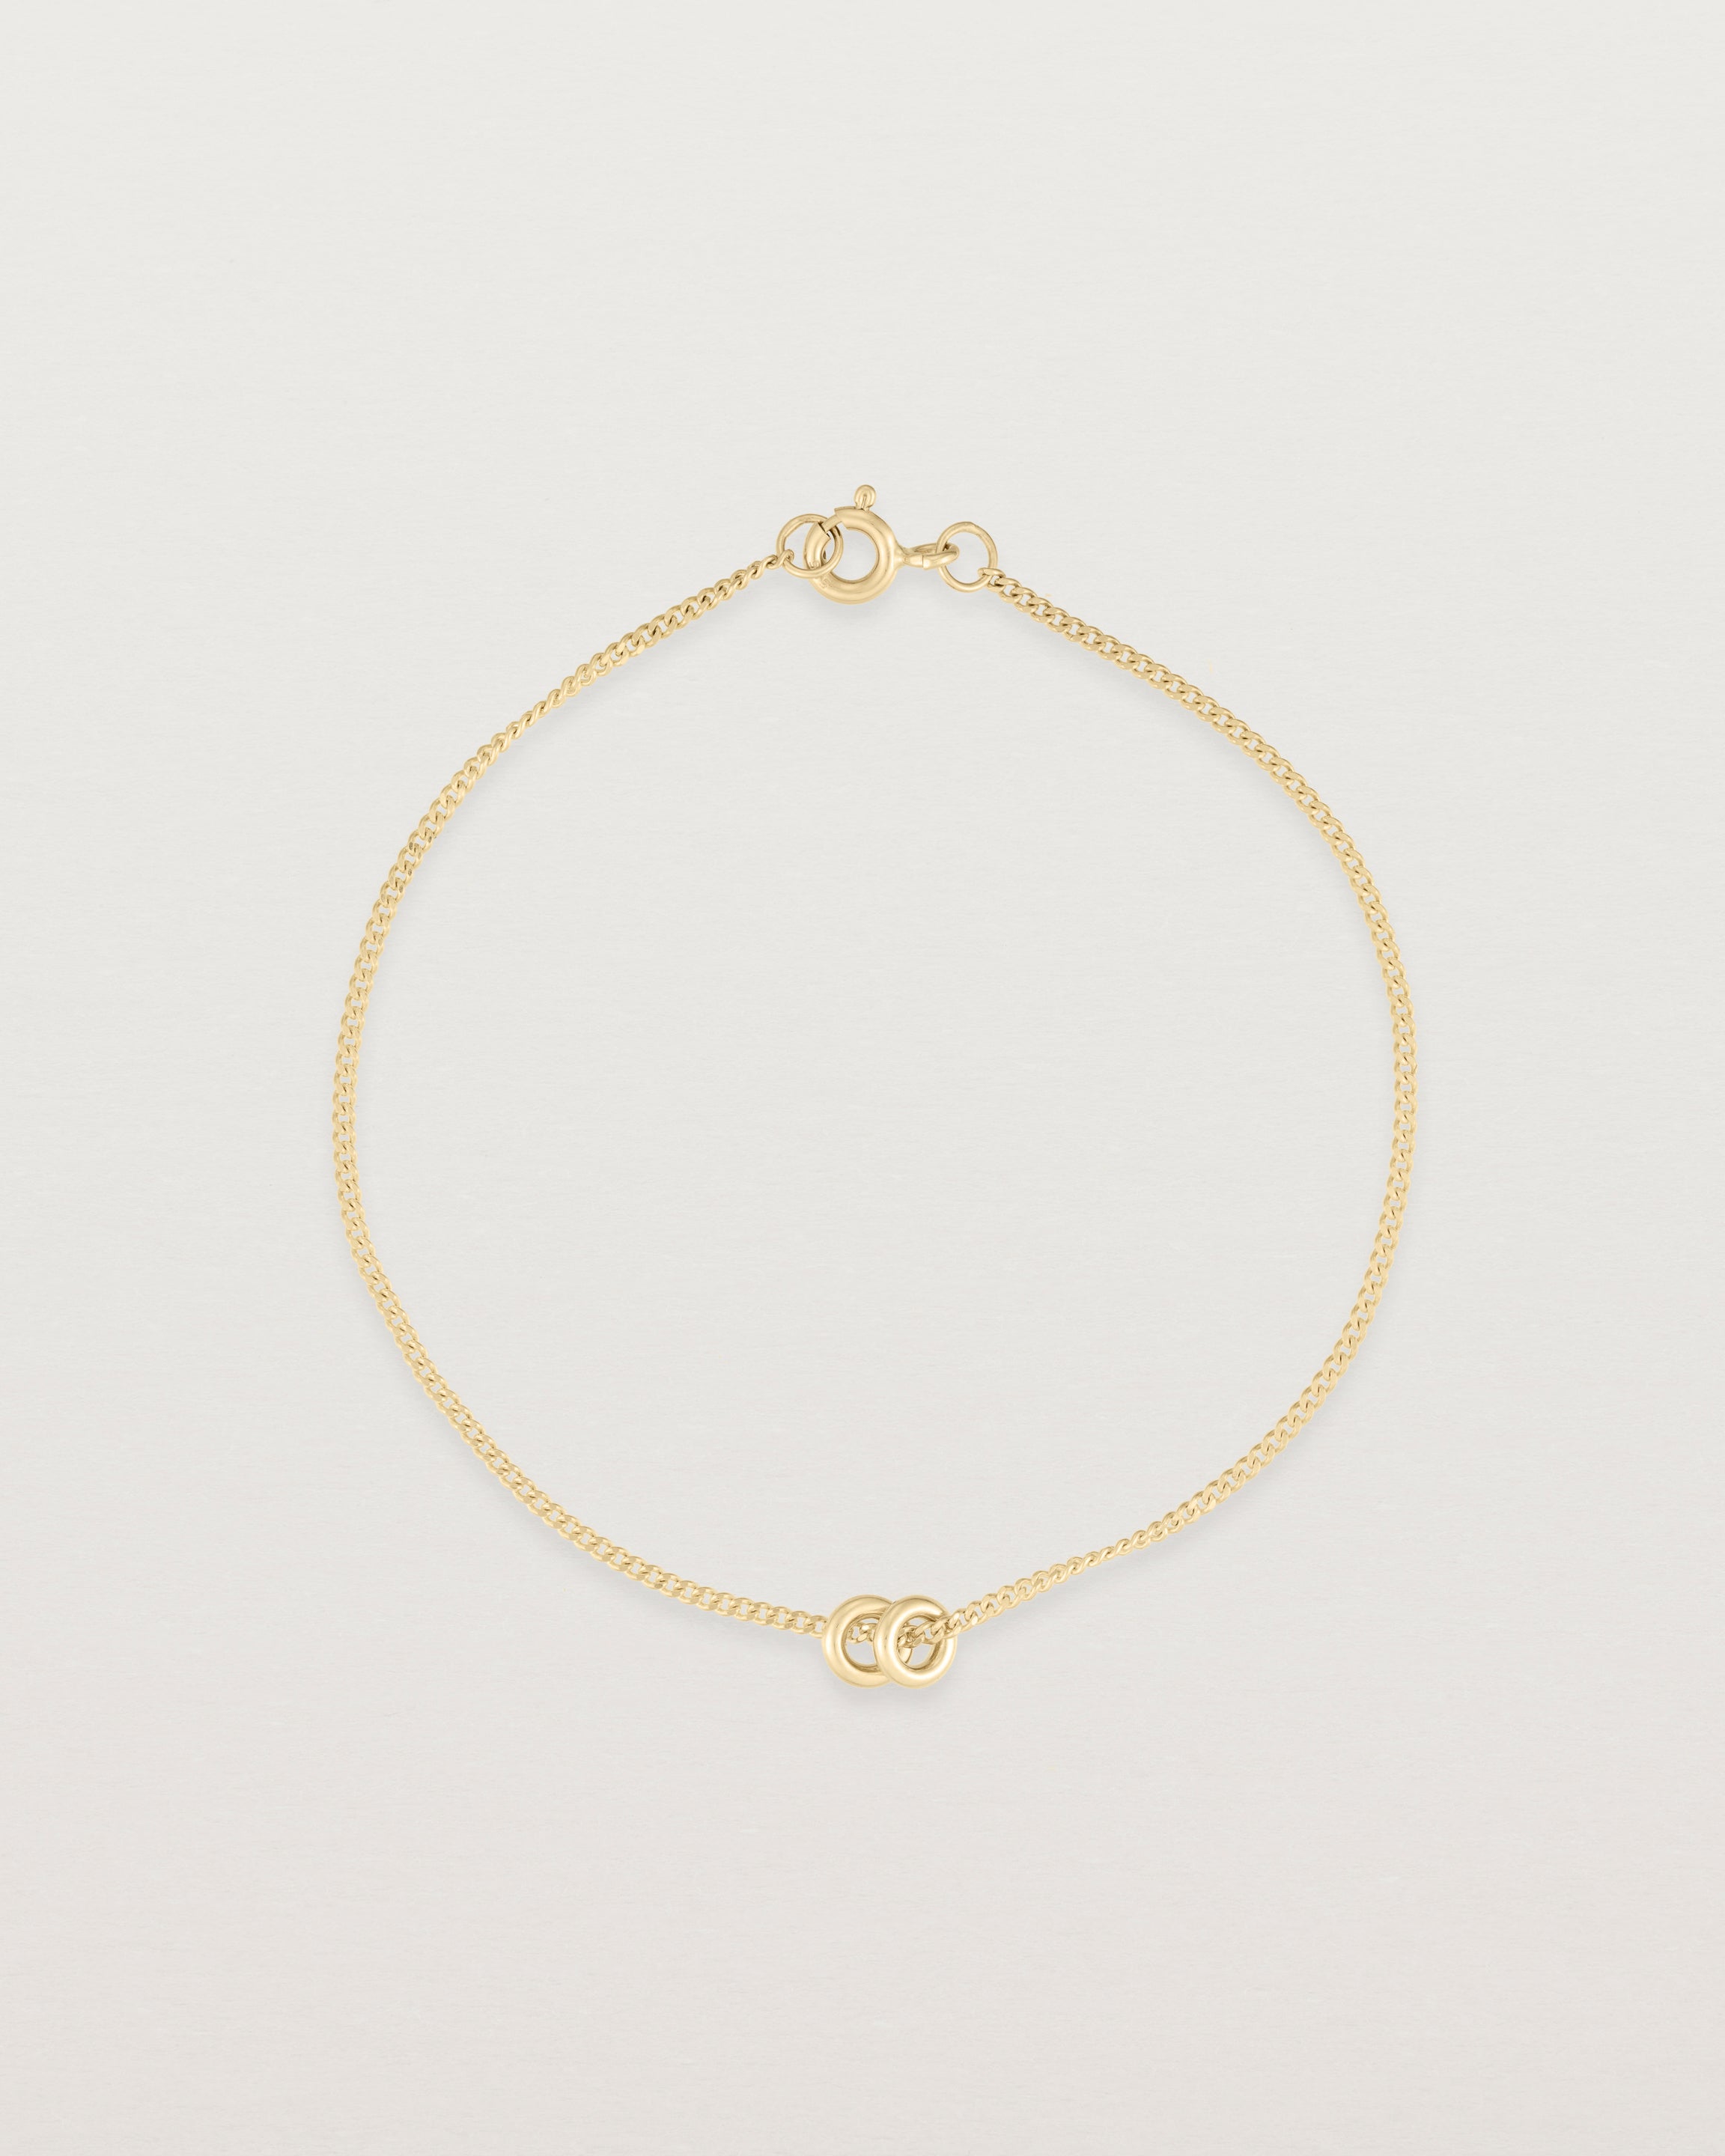 top down view of Aether bracelet featuring two round charms in yellow gold